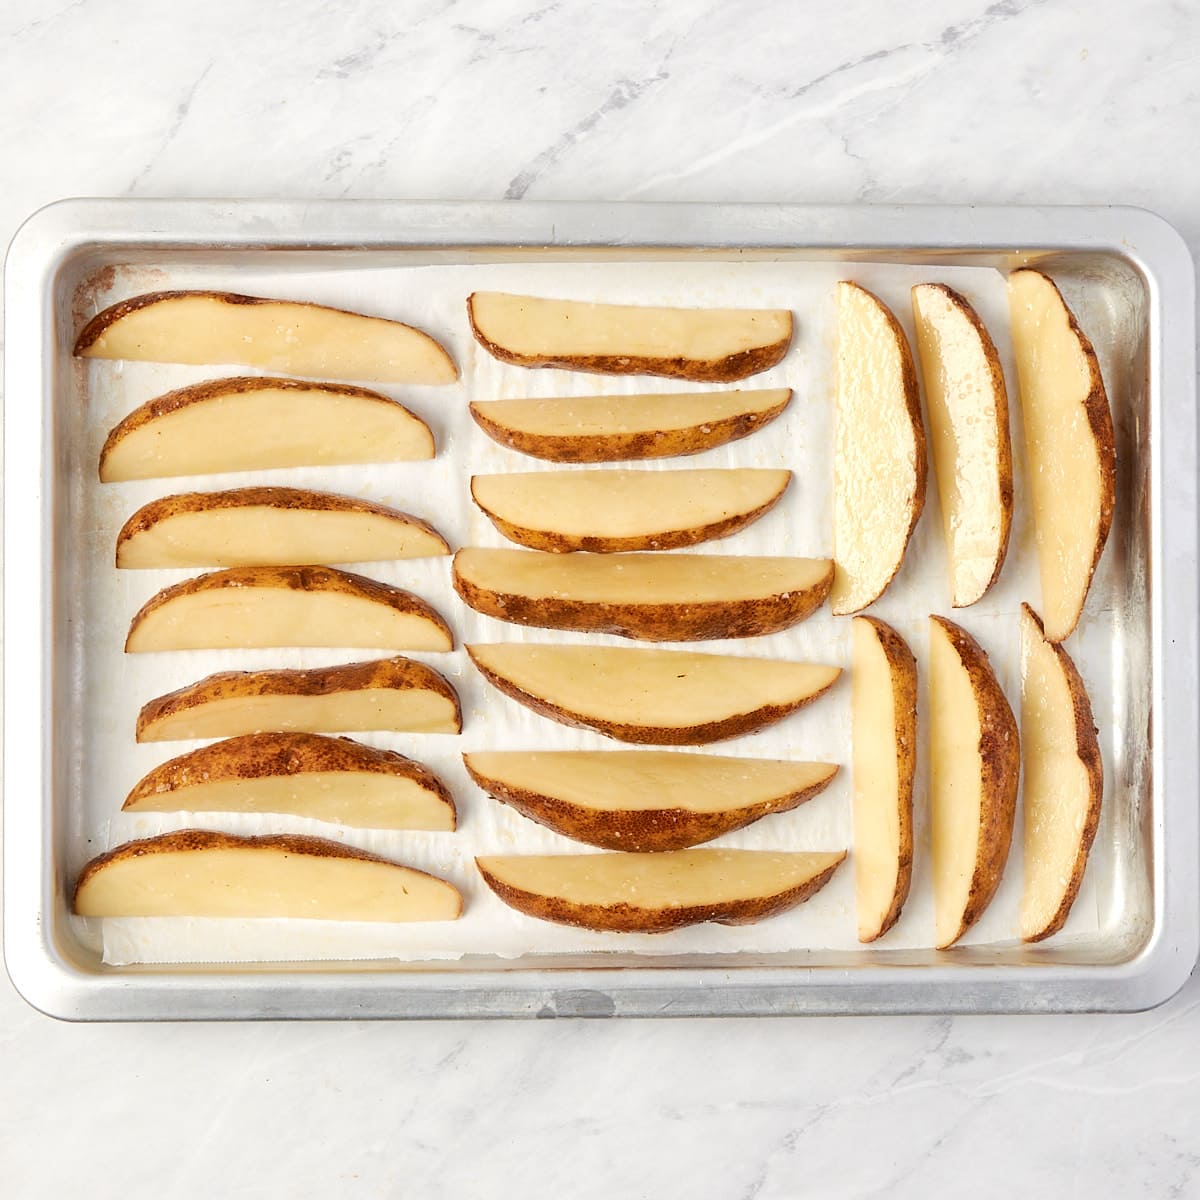 uncooked potato wedges on a cookie sheet.